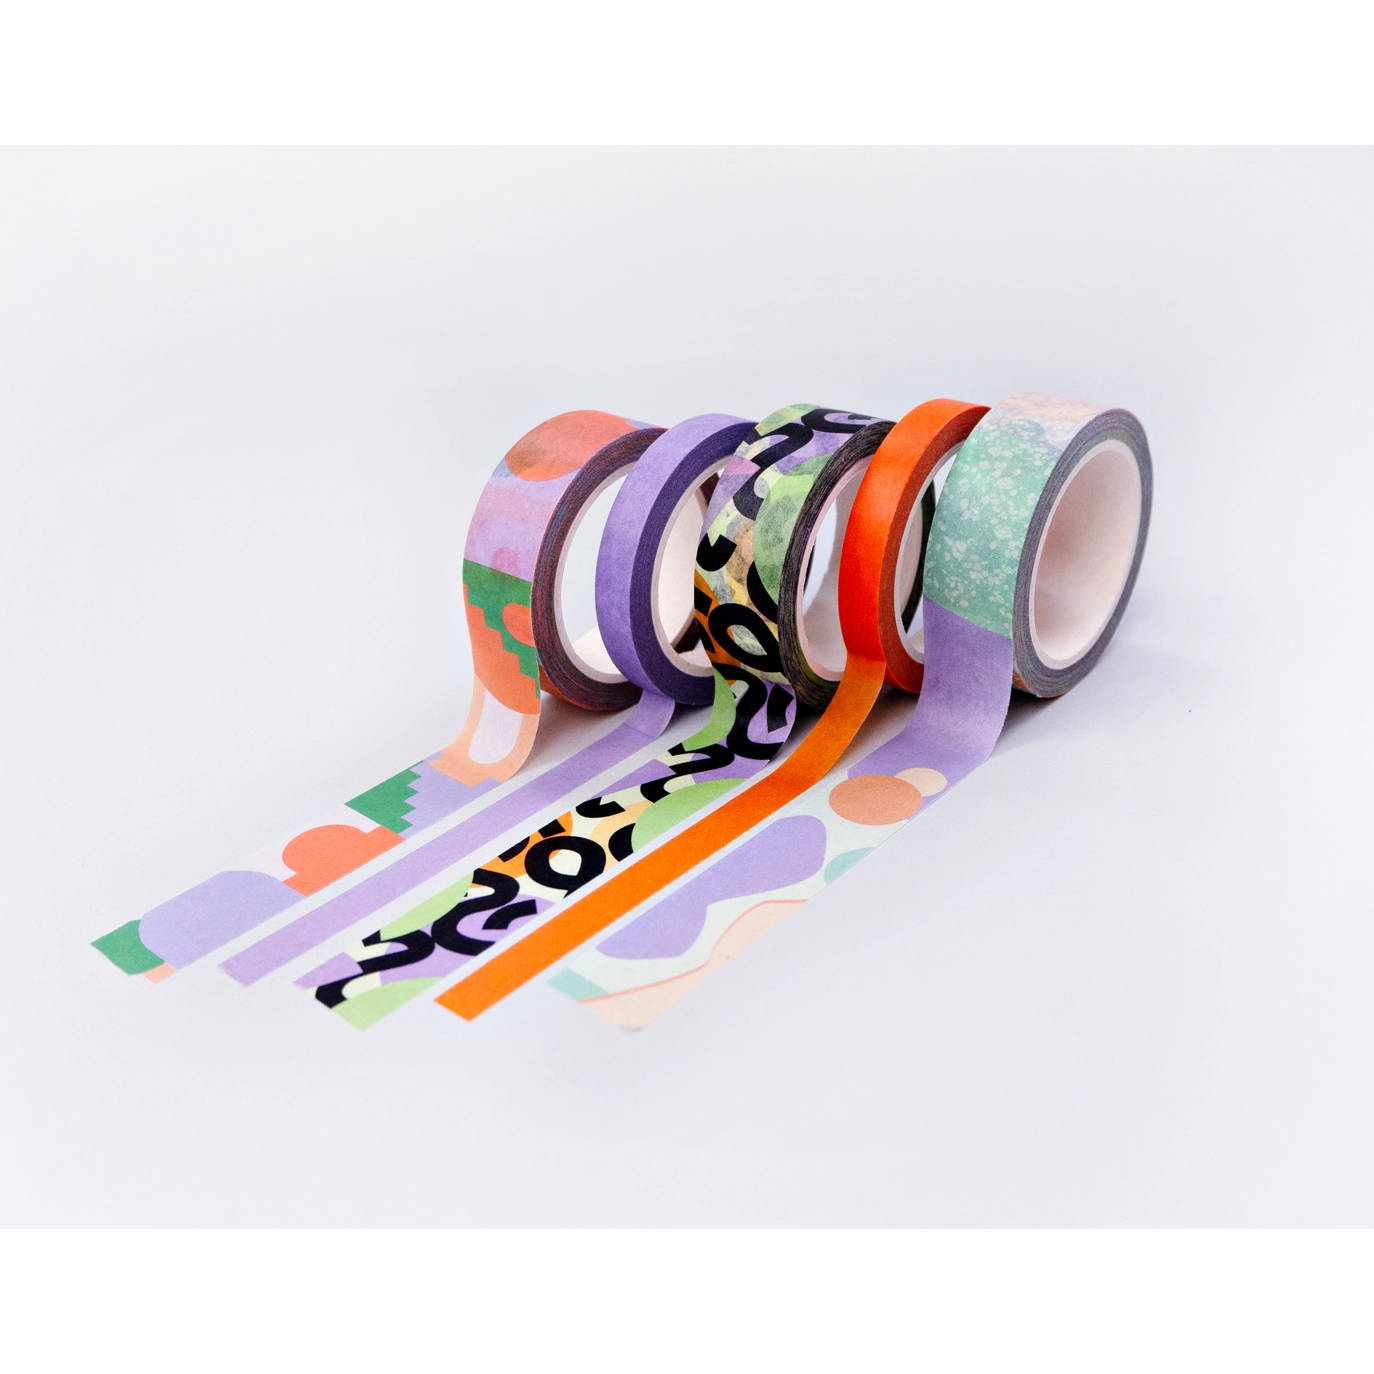 The Completist - Pastell Cities Washi Tape Set 4